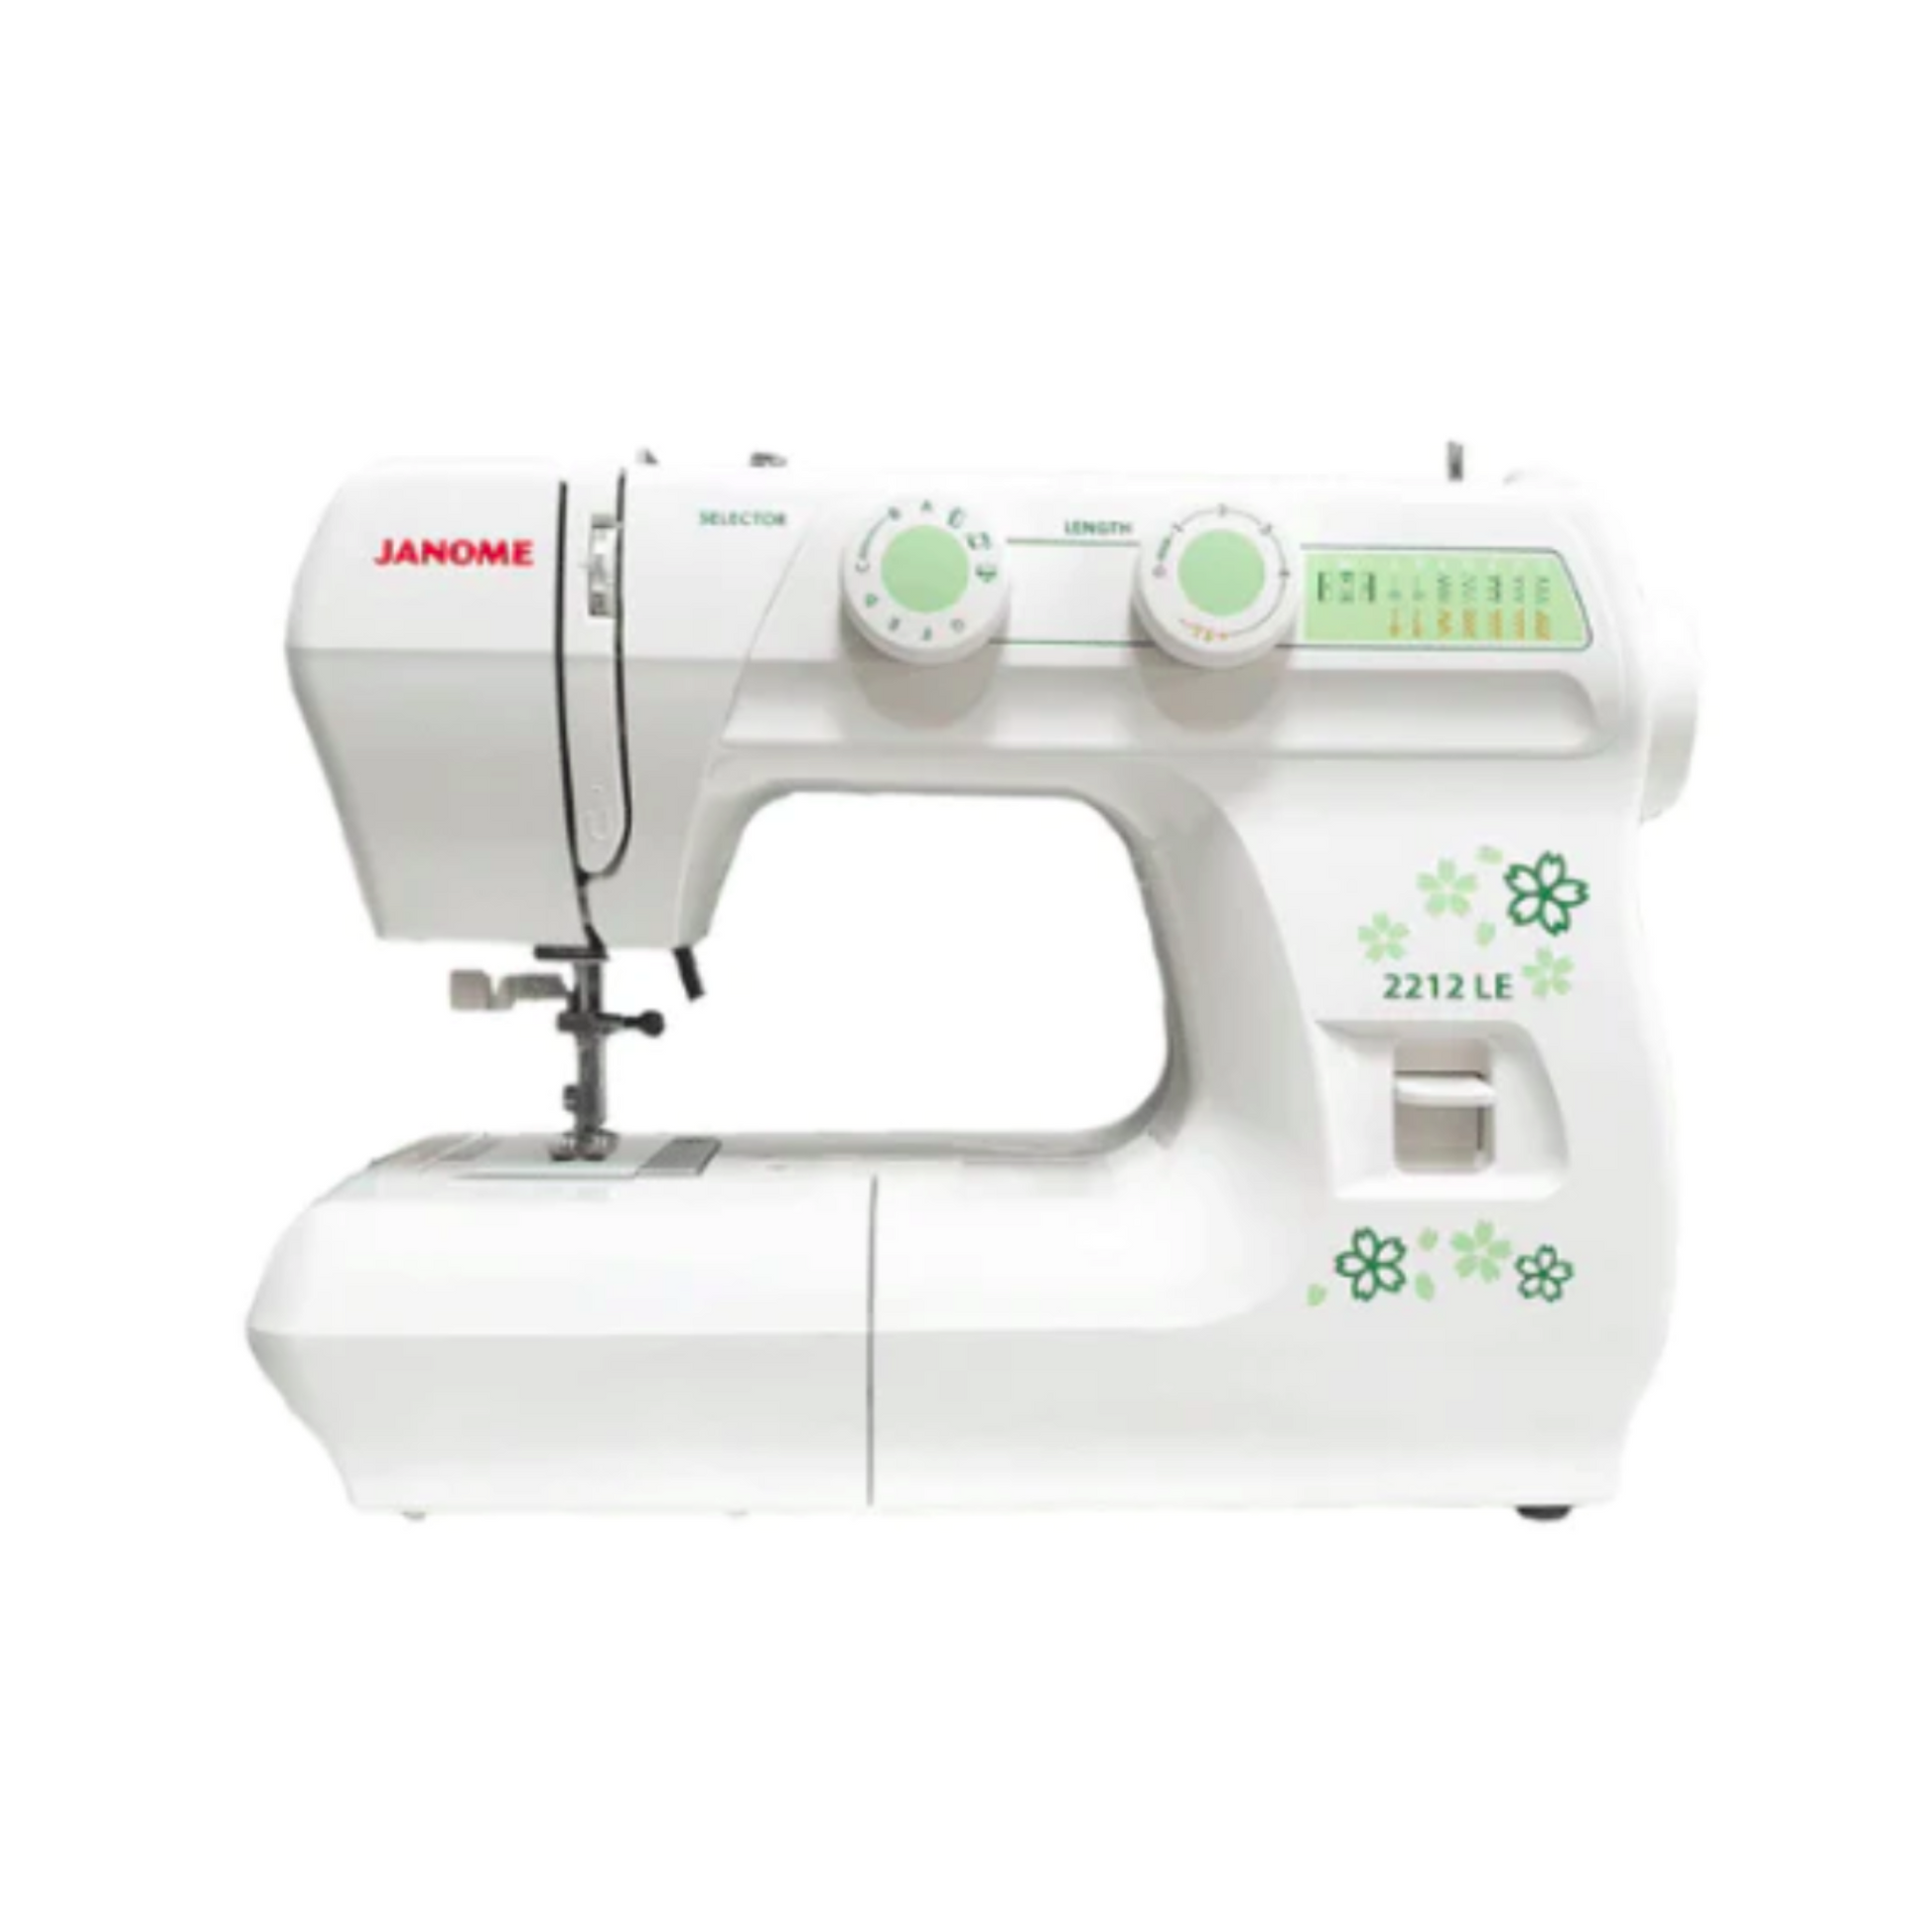 Janome 2212LE - Sewing machine - White - Front view